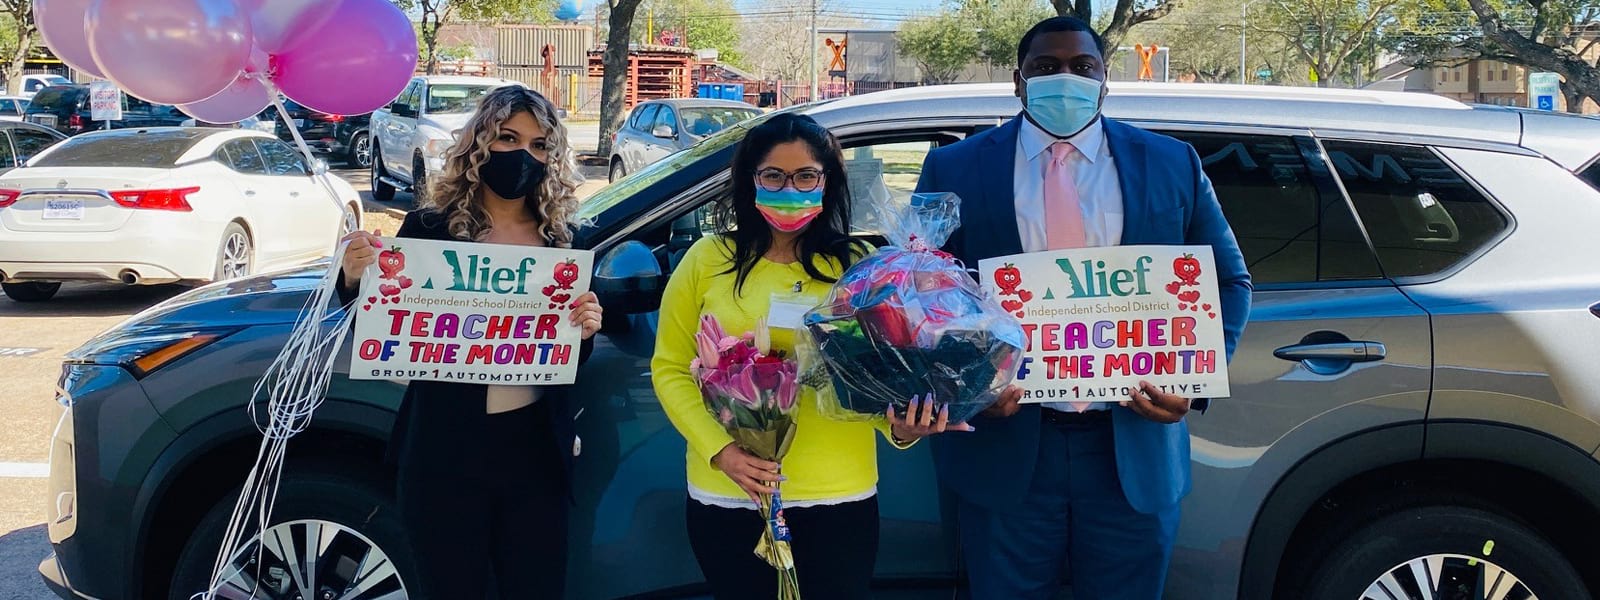 Alief ISD Teacher Honored by Sterling McCall VIP Services and Sterling McCall Nissan